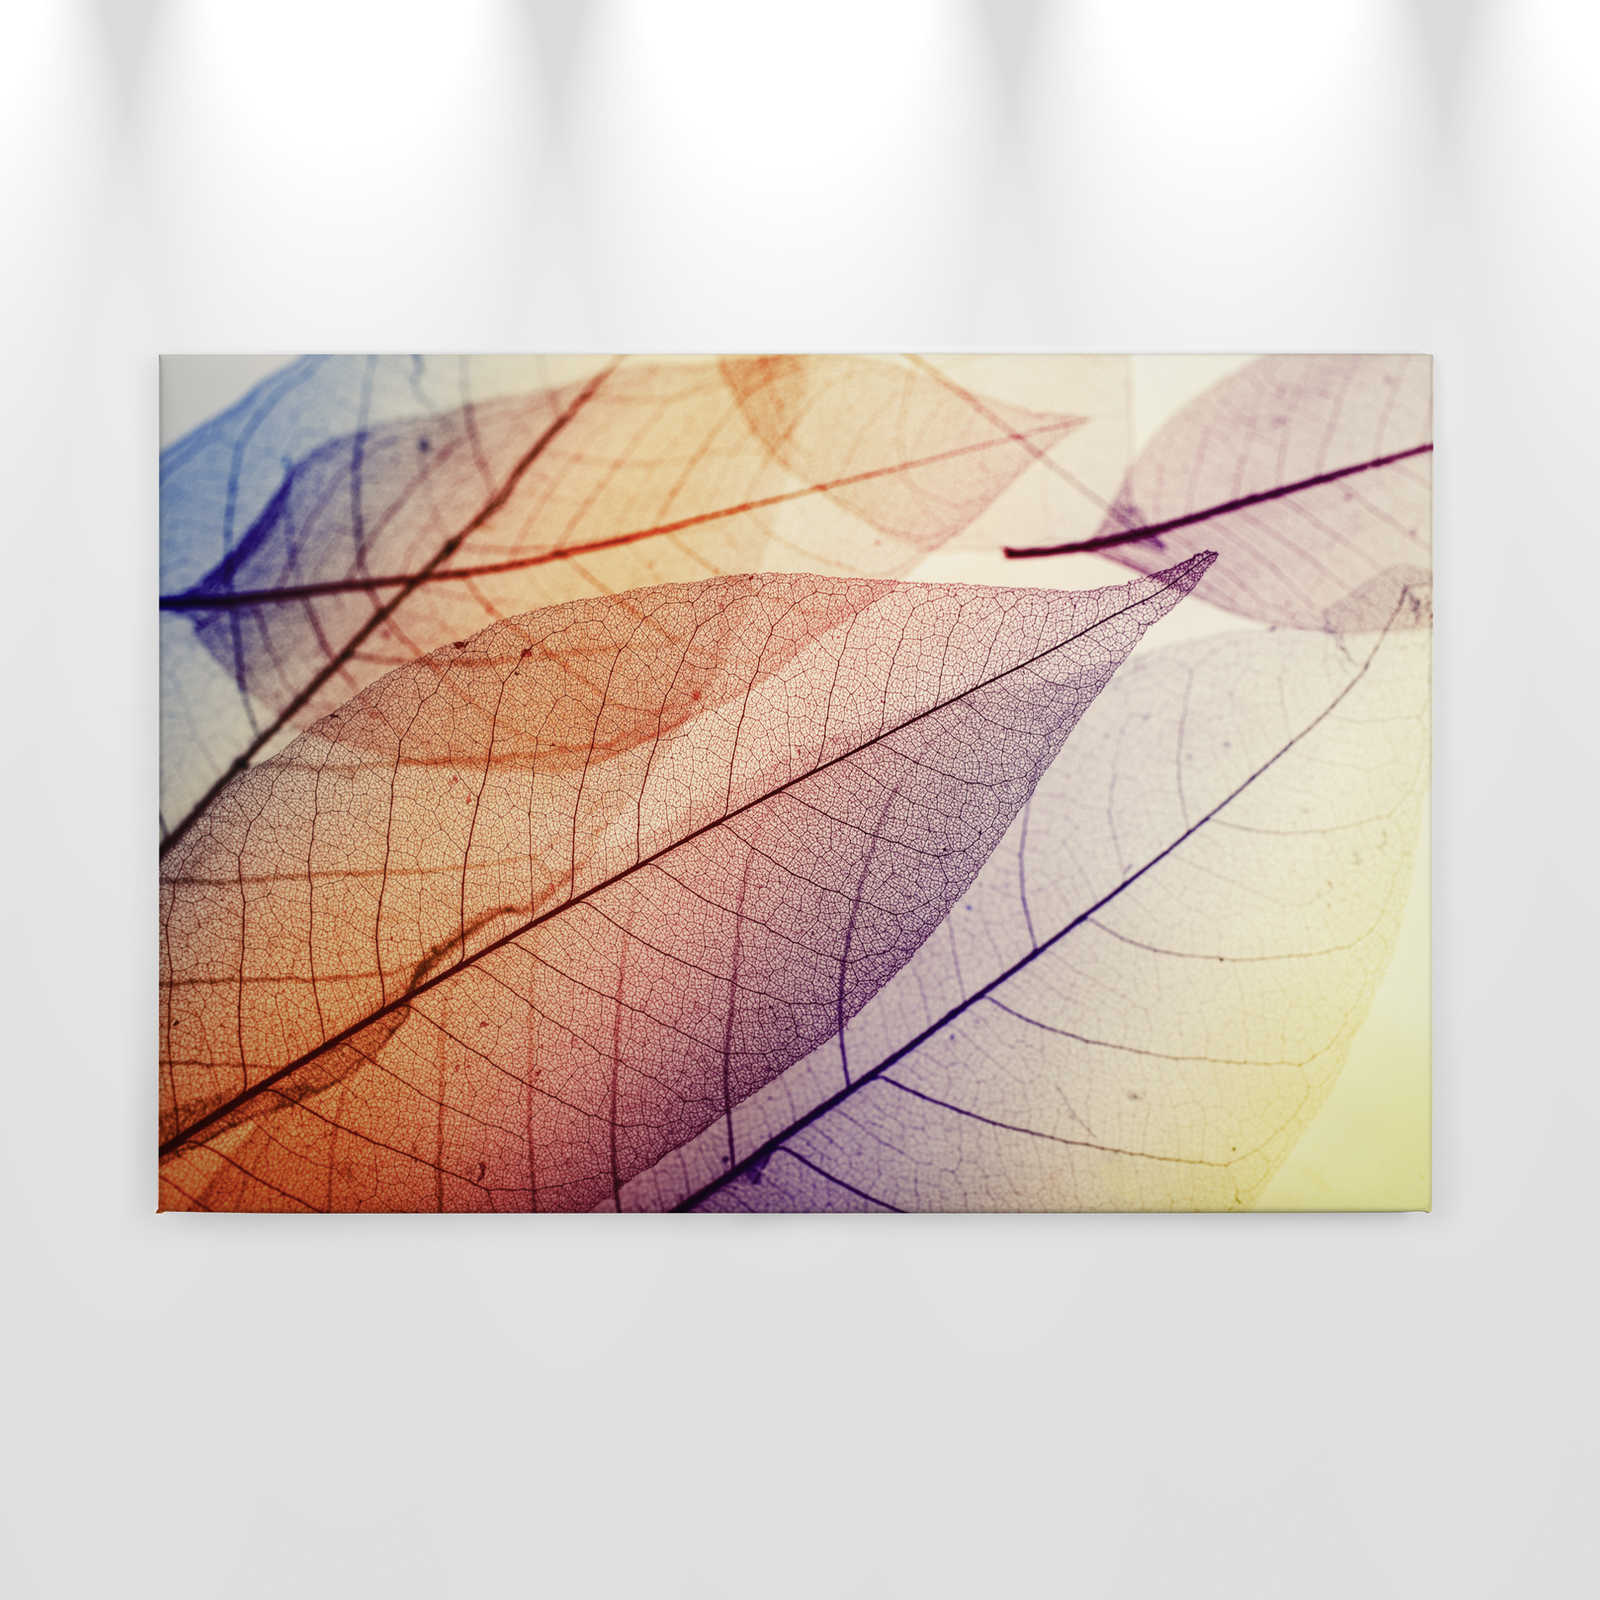             Canvas with leaf pattern X-ray - 0.90 m x 0.60 m
        